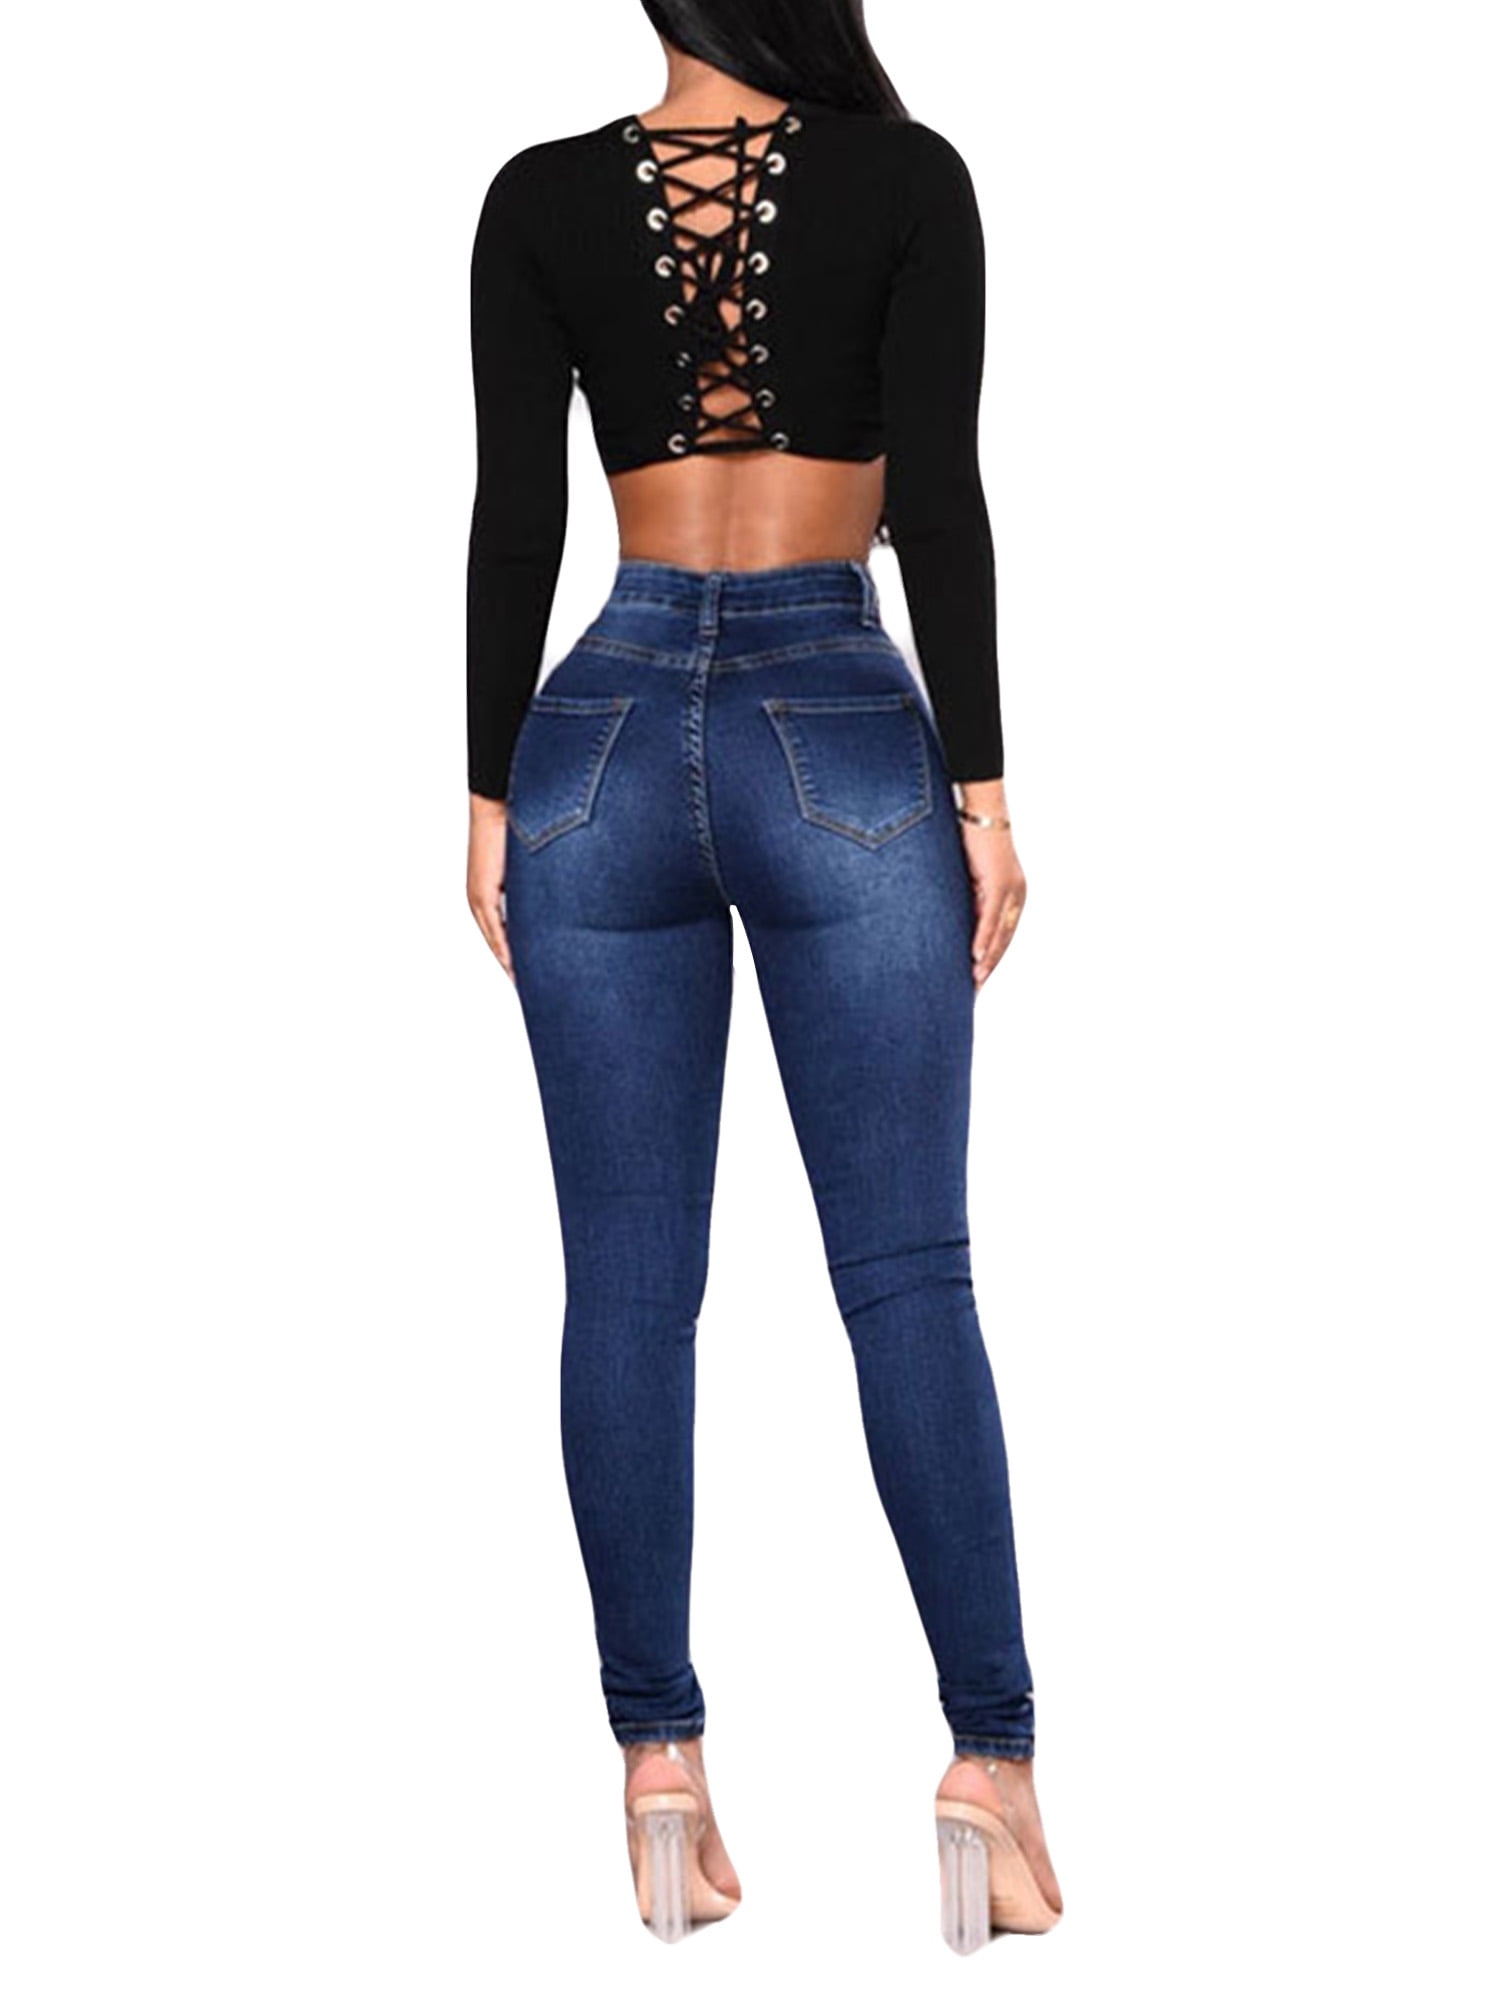 Shaping Skinny Jeans For Women Push Up Pencil Pants With Butt Lift,  Slimming Fit Mom Trouser Jeans For Women 220908 From Kong00, $23.02